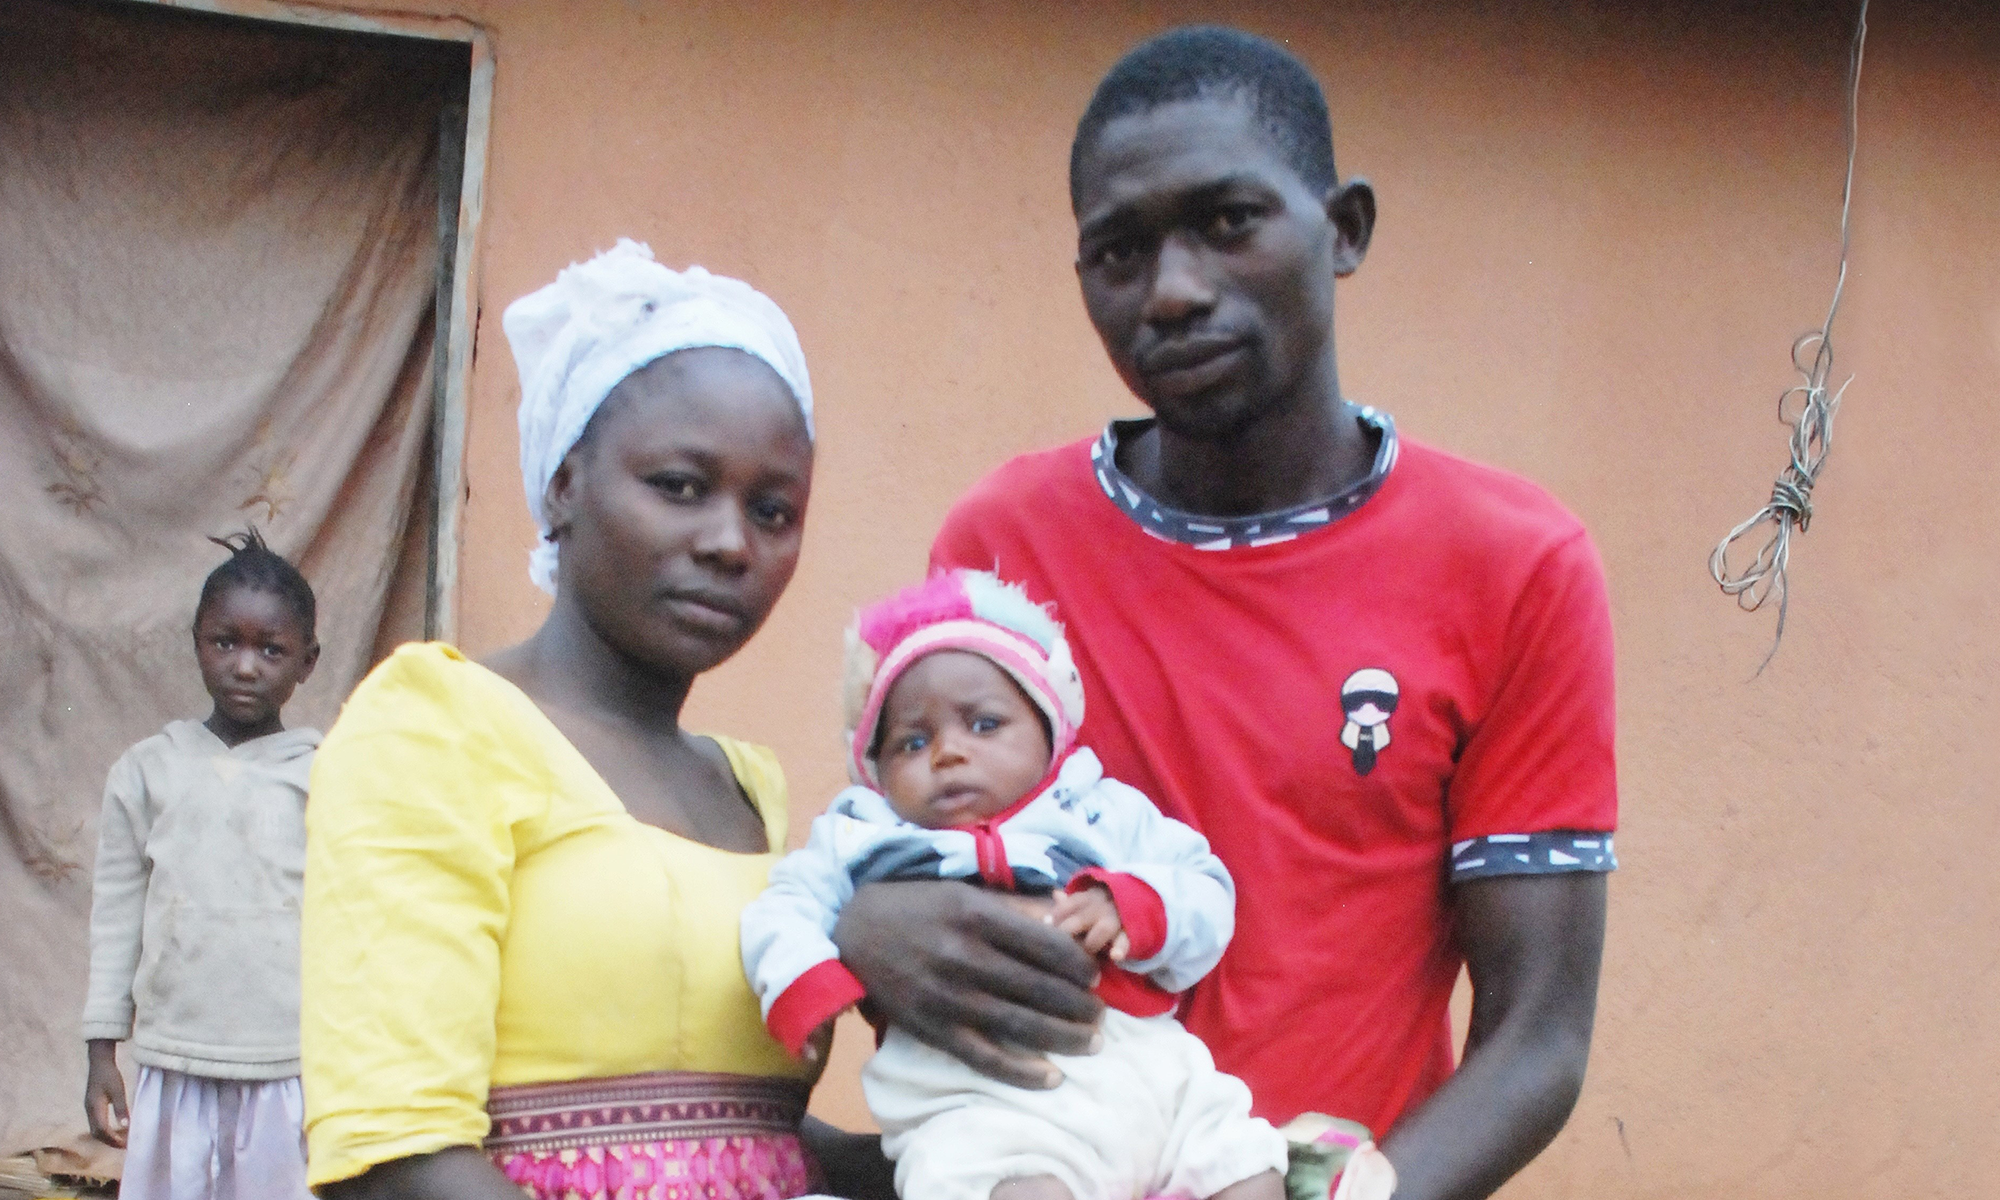 Close up photo of a Nigerian man, woman and baby with a girl in the background